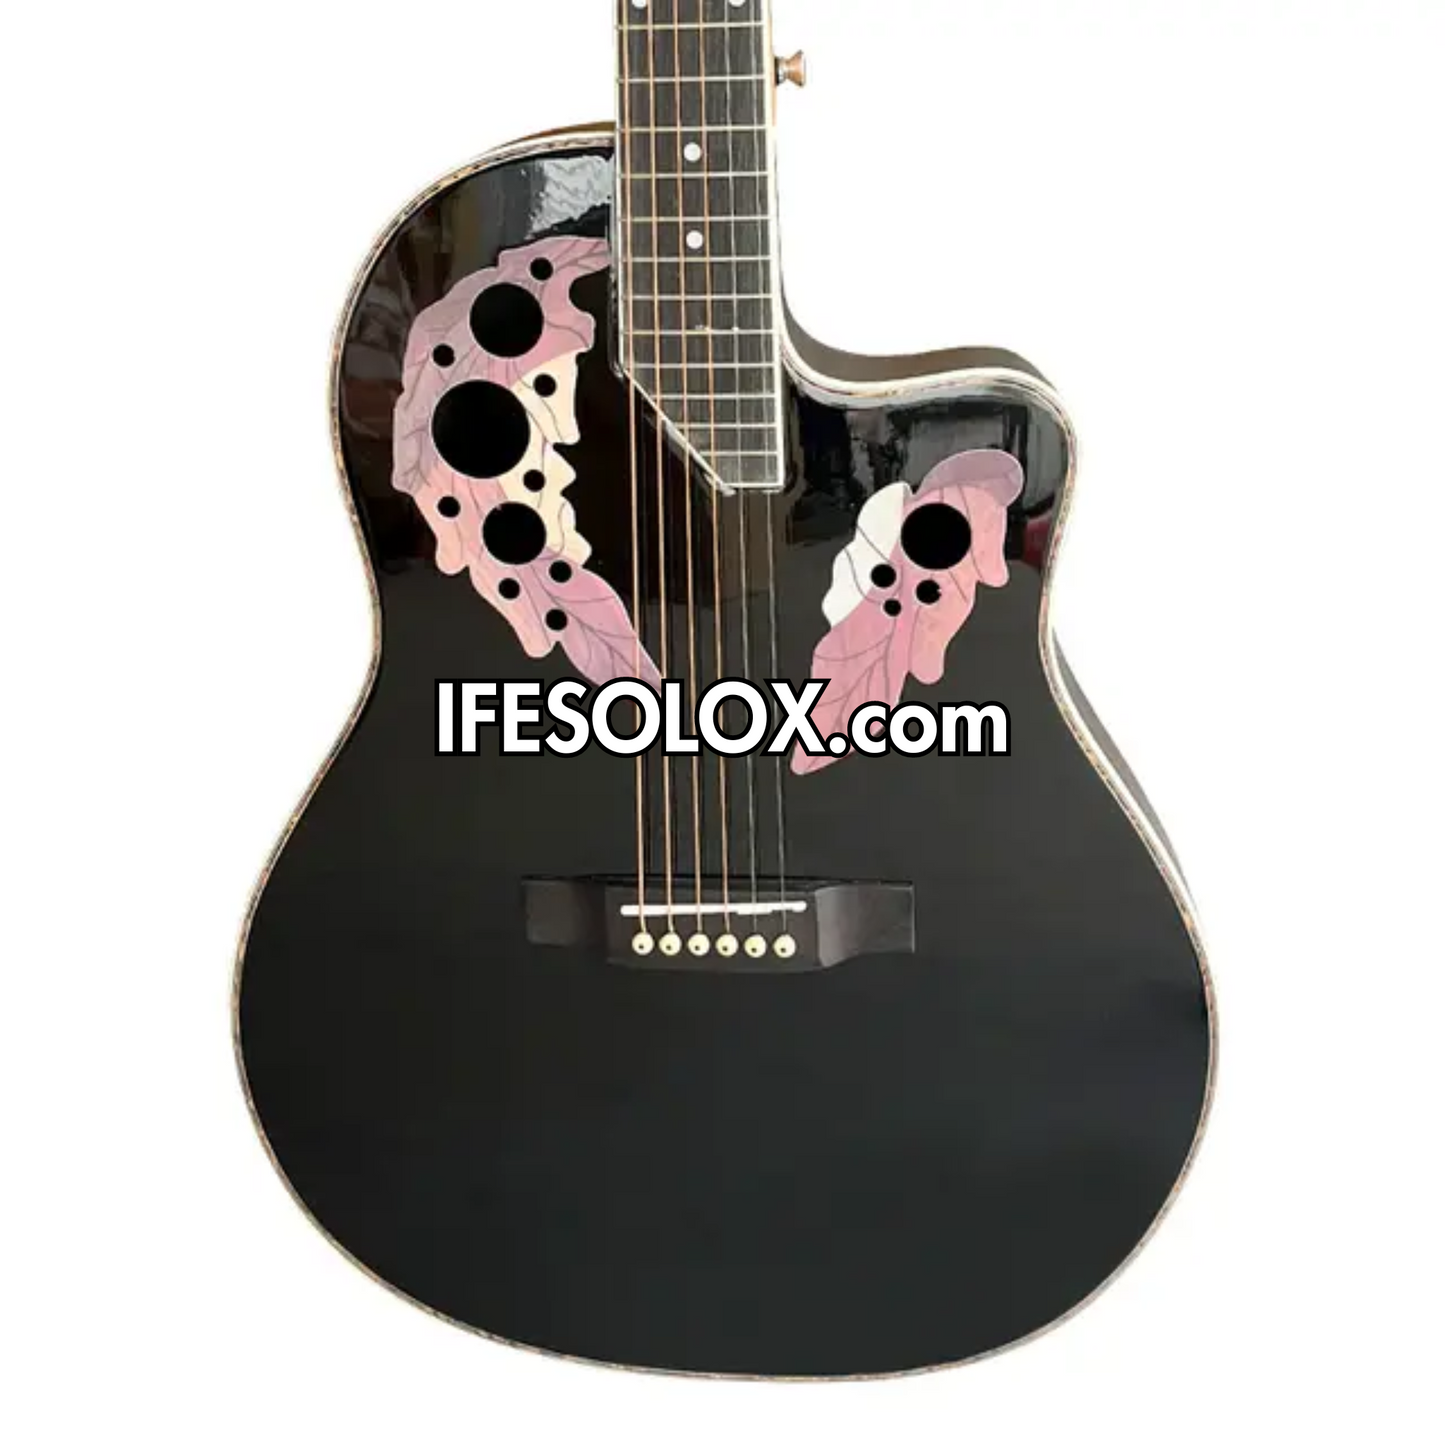 Premium 41" Professional Black Electro-Acoustic Guitar with Bag and Belt - Brand New